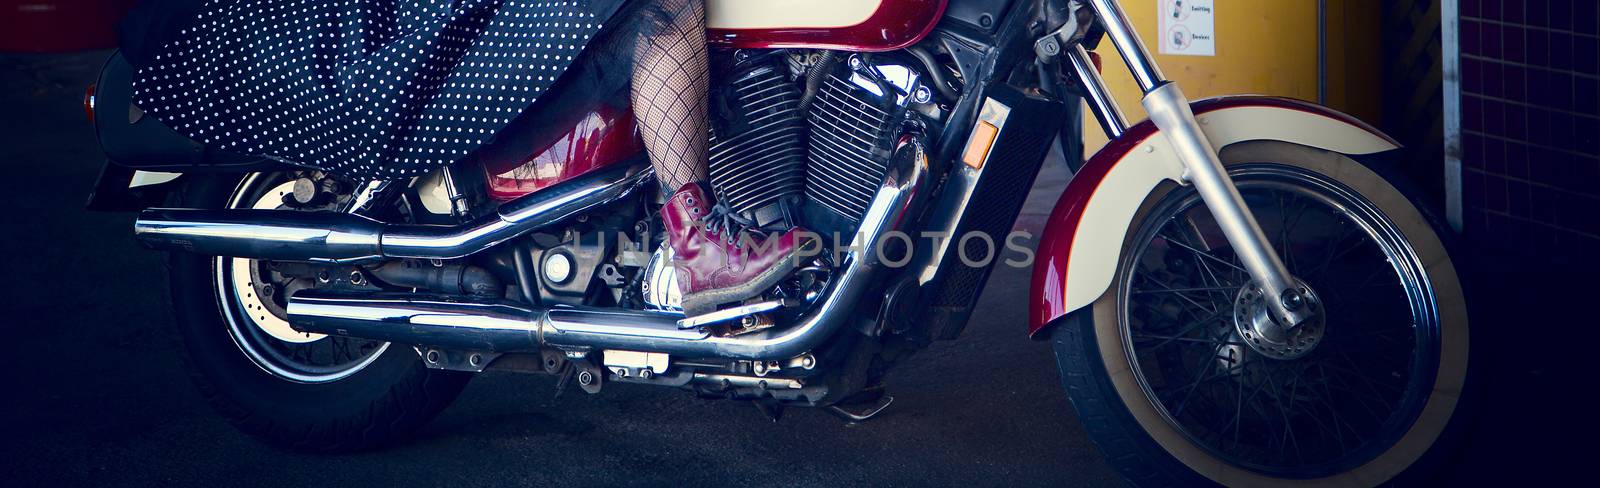 Close up of a woman's leg encased in net stockings and wearing a red boot, riding a motorcycle